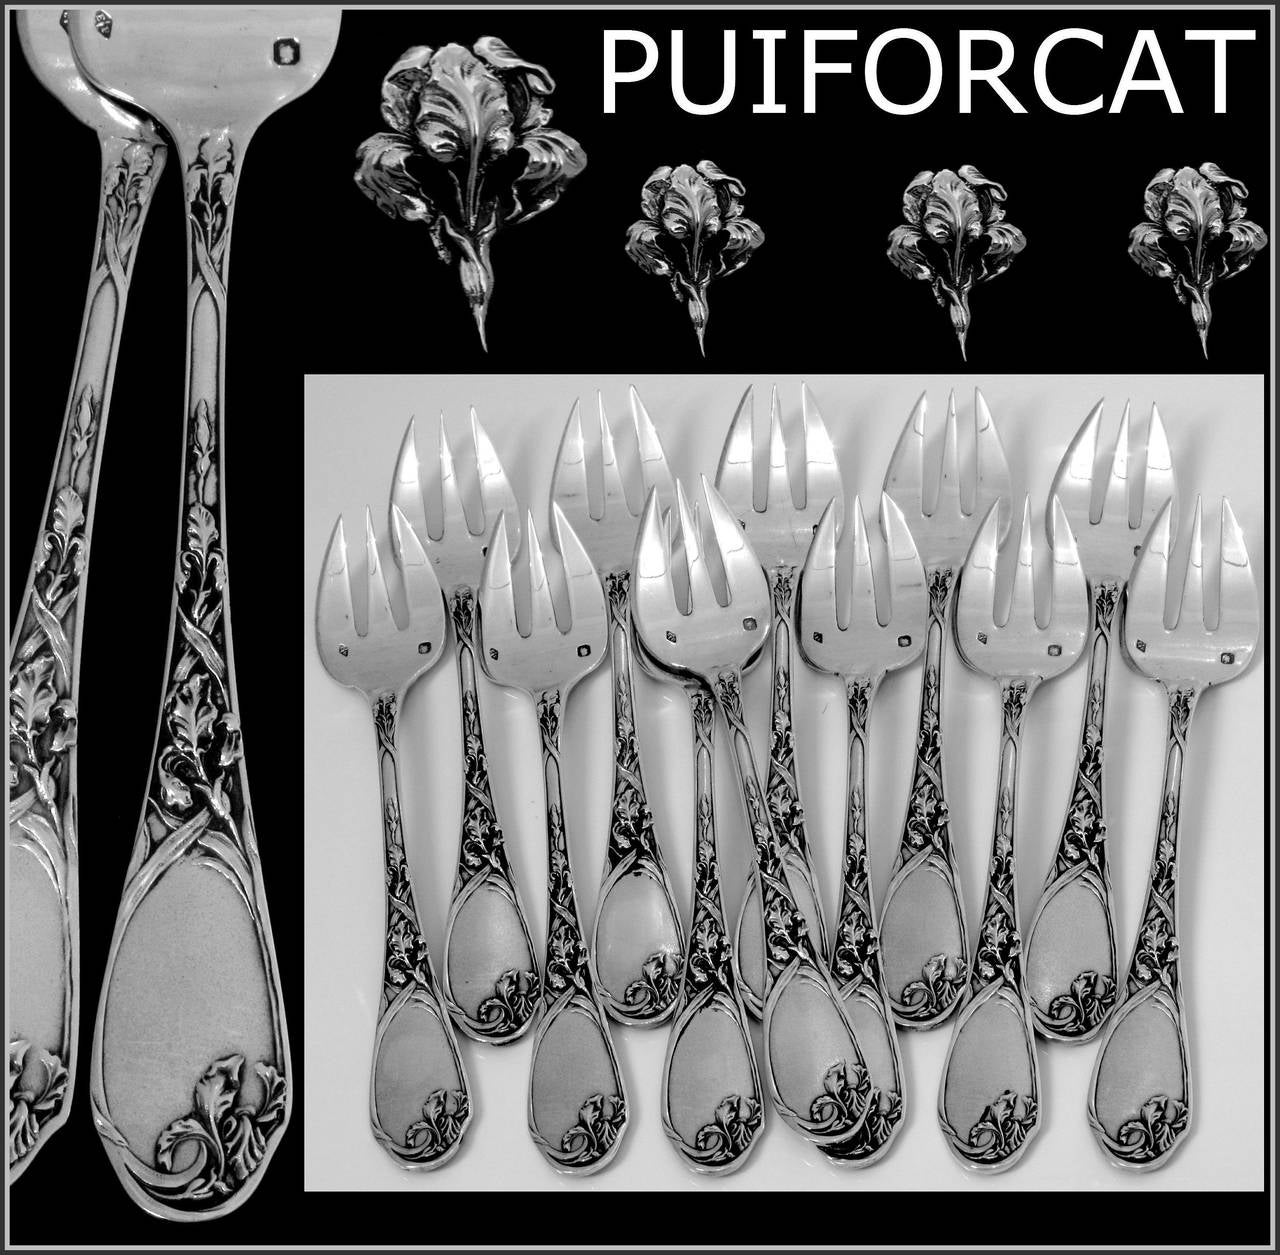 PUIFORCAT Fabulous French All Sterling Silver Oyster Forks 12 pc Iris Pattern

Head of Minerve 1 st titre for 950/1000 French Sterling Silver guarantee

The set have a fantastic Iris motif in Art Nouveau style. No monograms.

To complete this